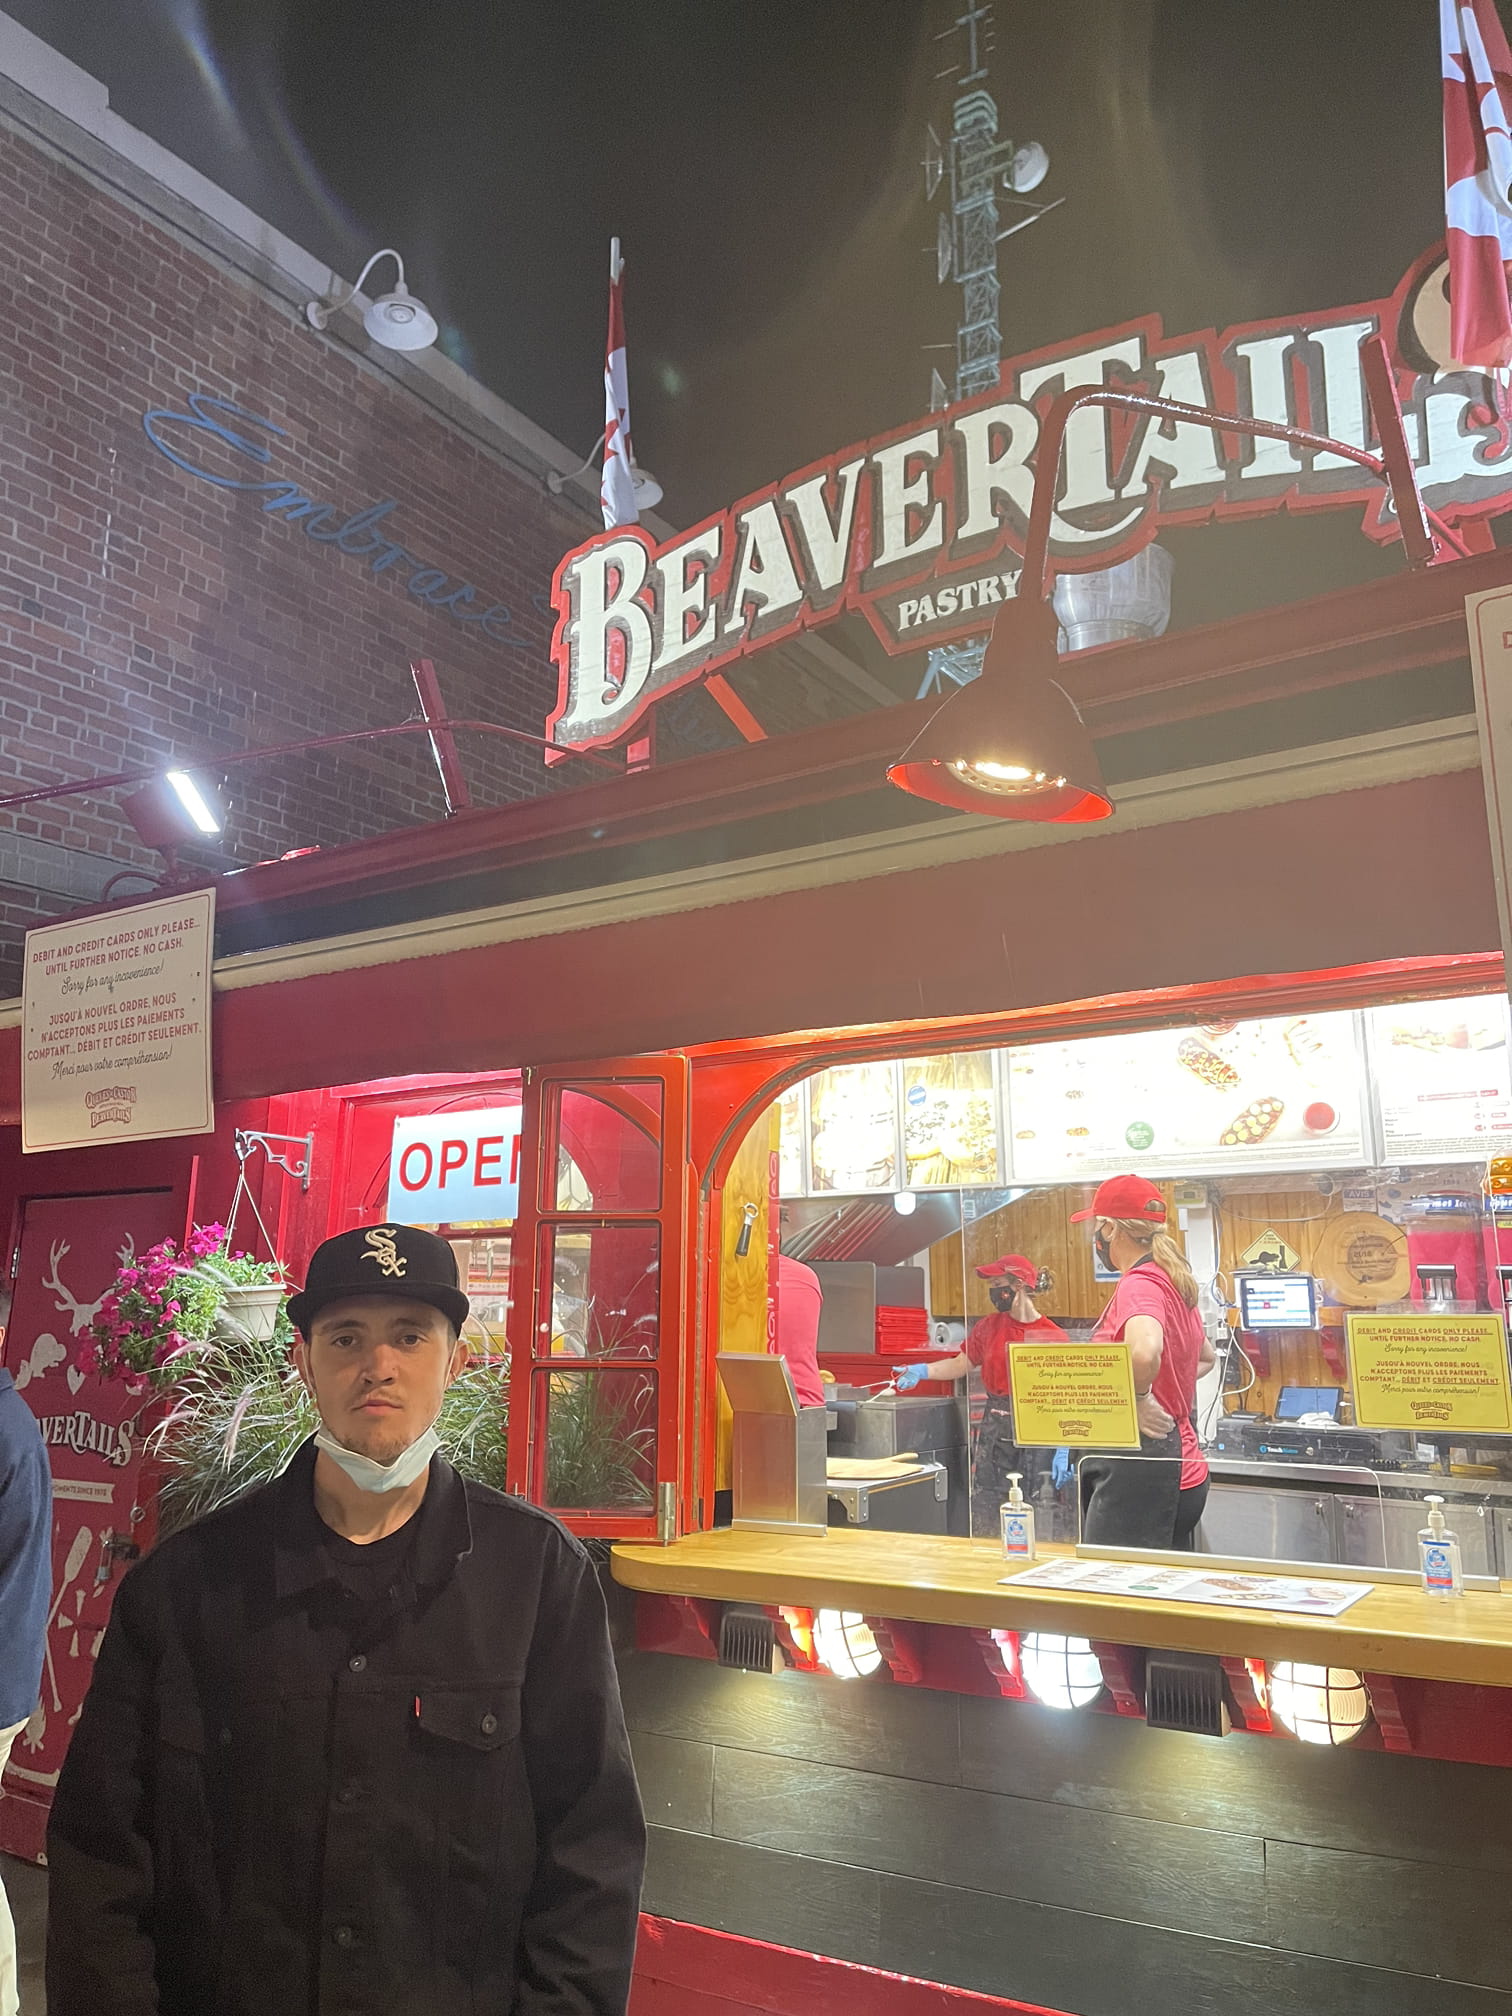 Beaver tails are fried dough with cinnamon and sugar - Ottawa specialty 